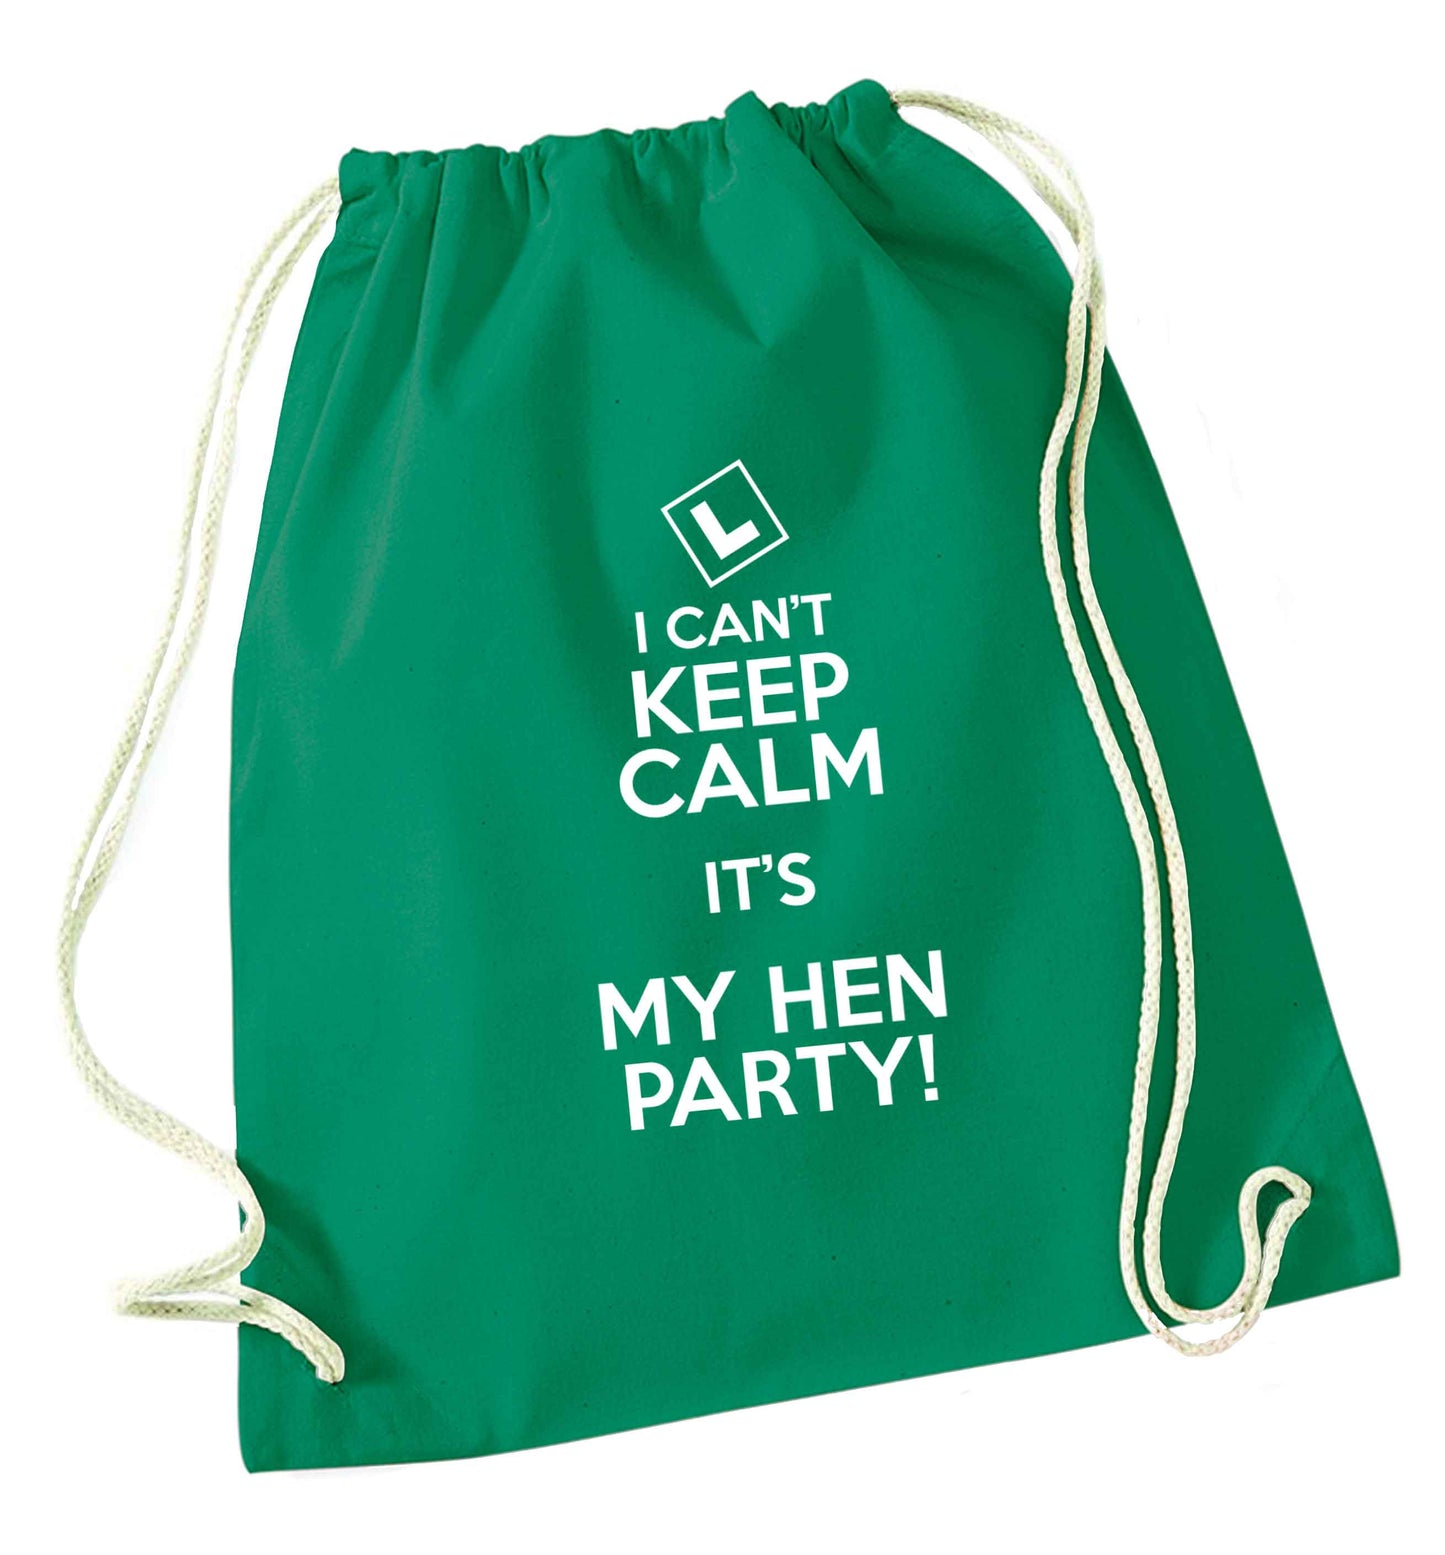 I can't keep calm it's my hen party green drawstring bag